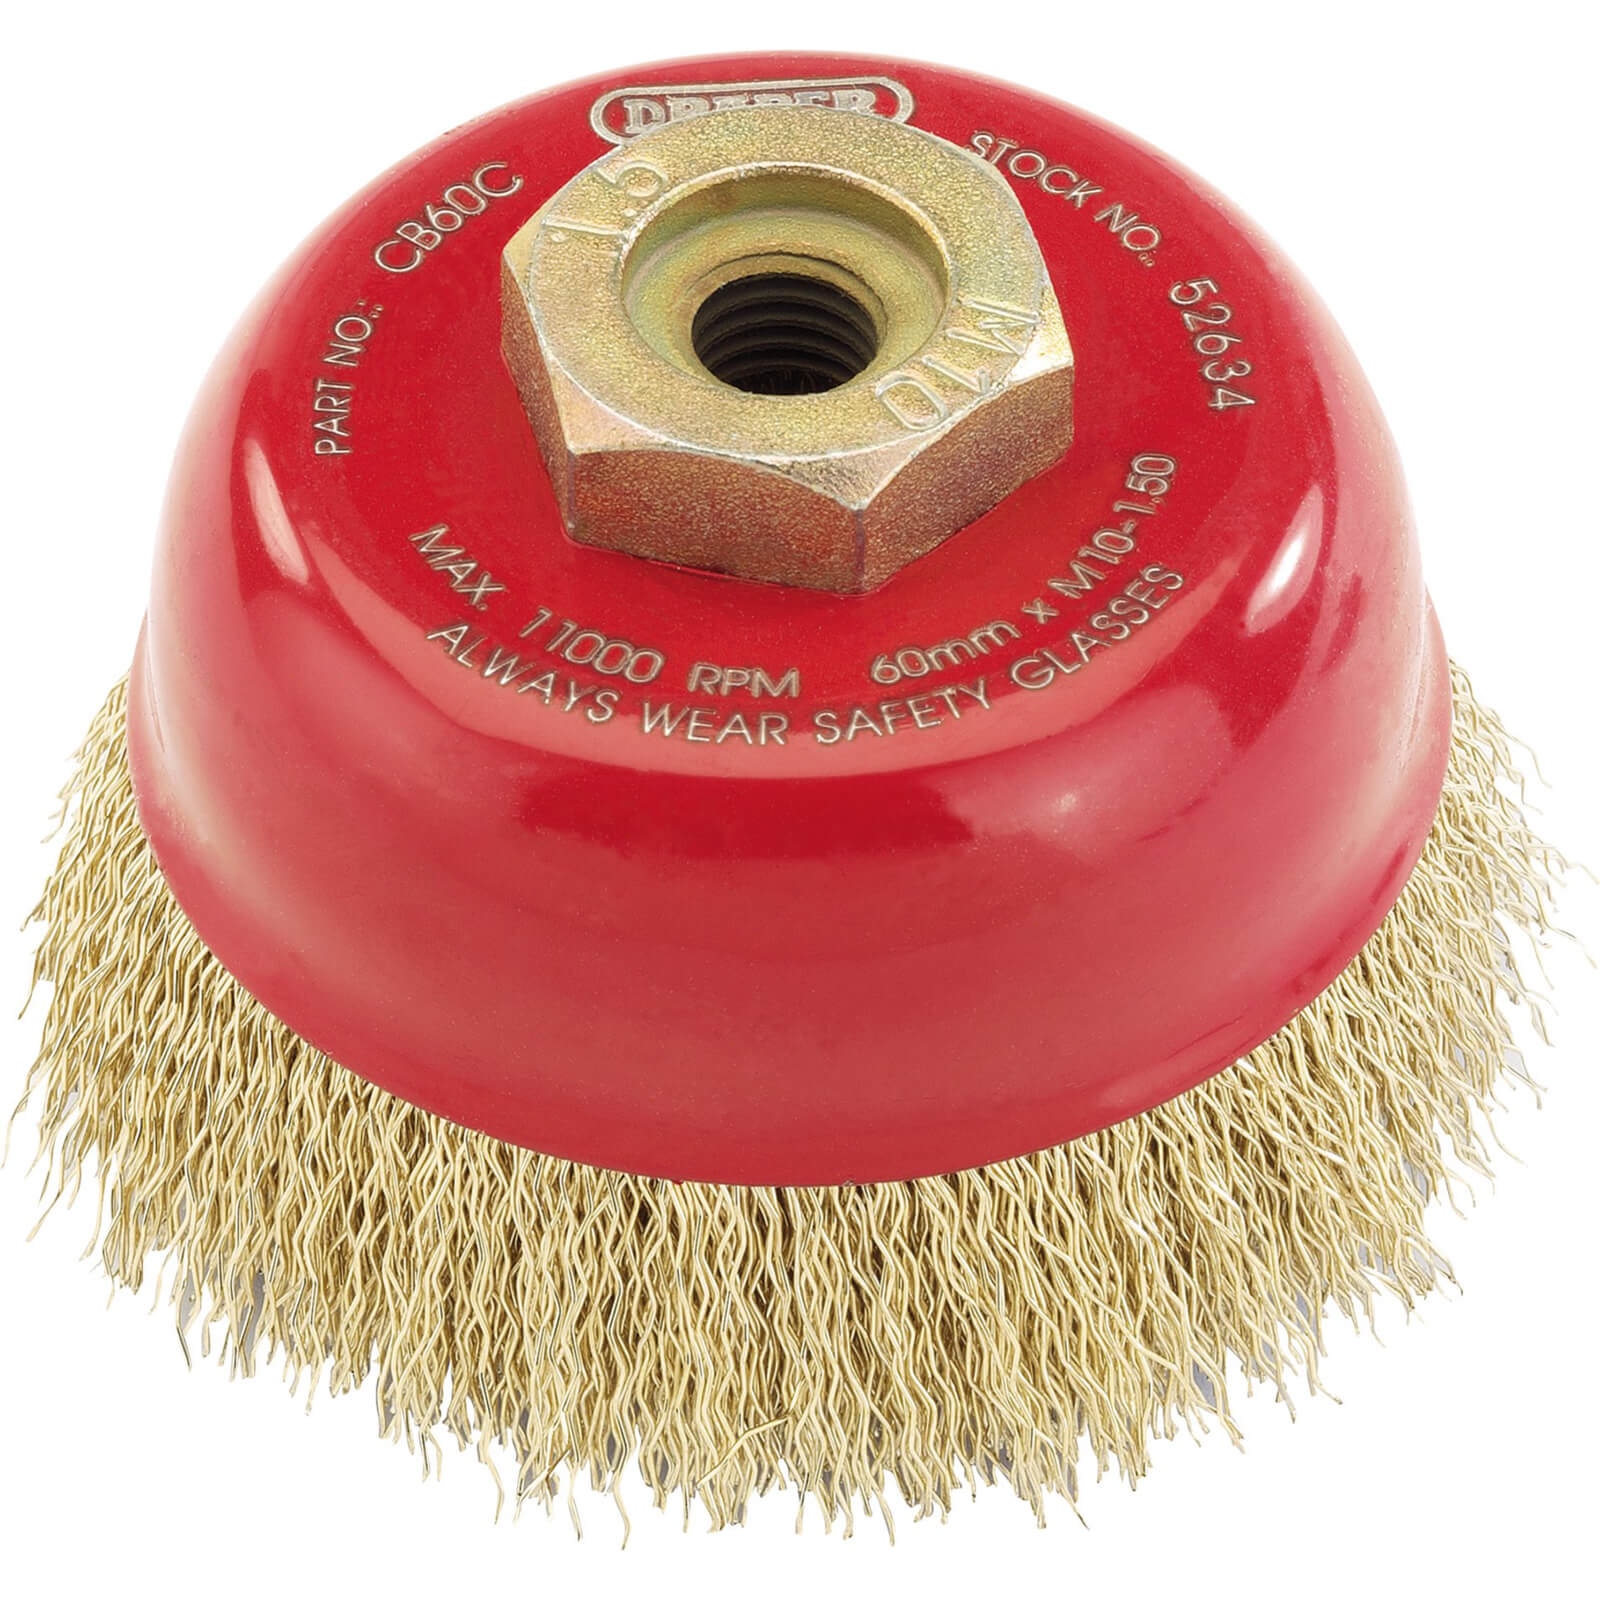 Photo of Draper Expert Brassed Steel Wire Cup Brush 60mm M10 X 1.5 Thread